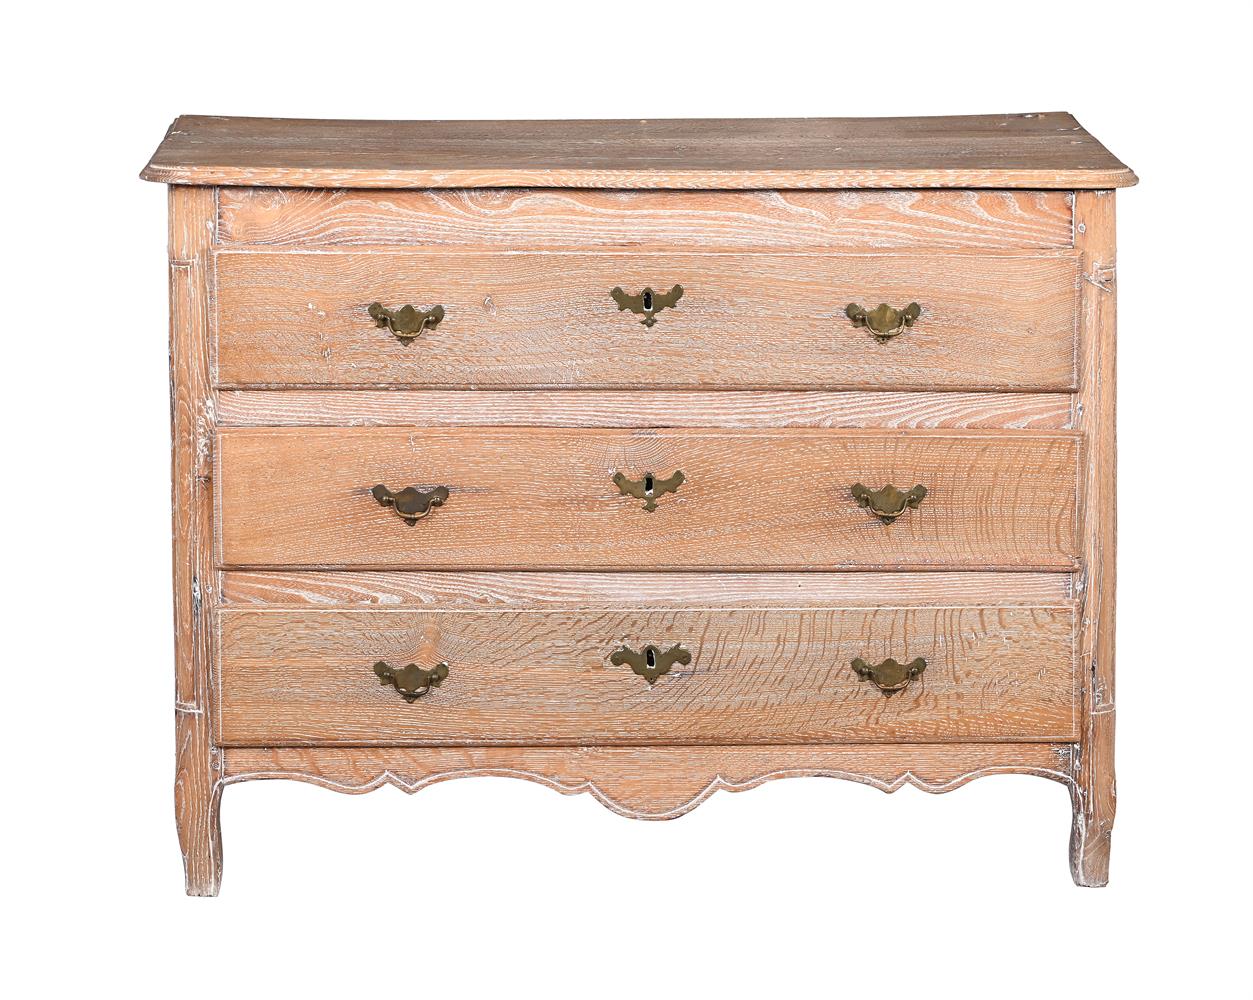 A FRENCH LIMED OAK CHEST OF DRAWERSPROBABLY PROVENCAL